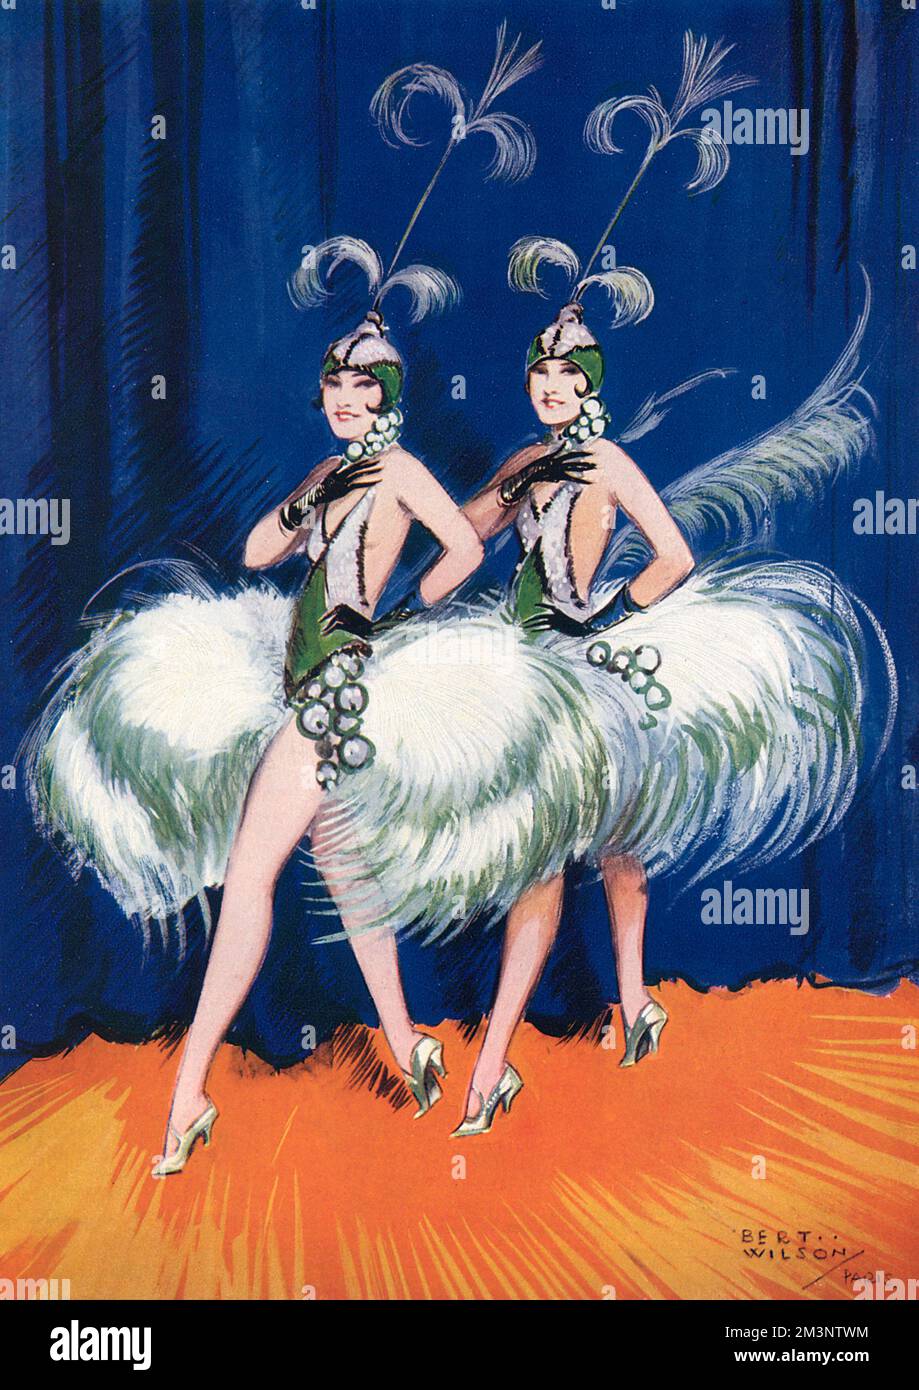 Rosie and Jenny Dolly, stage performers the Dolly Sisters pictured performing a routine in feathered costumes.     Date: 1927 Stock Photo